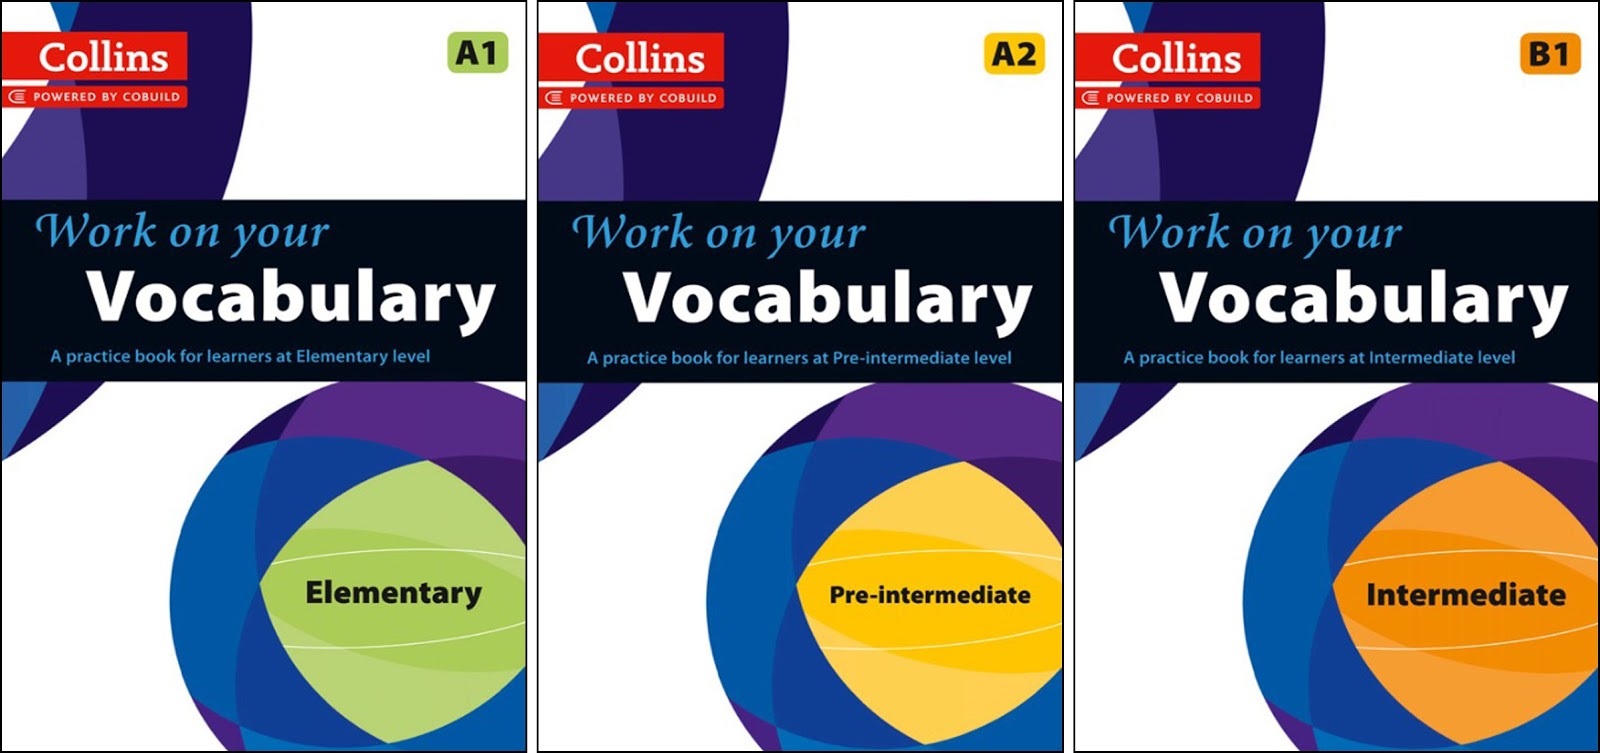 Practice english vocabulary. Collins work on your Grammar. Work on your Vocabulary. Vocabulary Practice. Oxford Academic Vocabulary Practice.